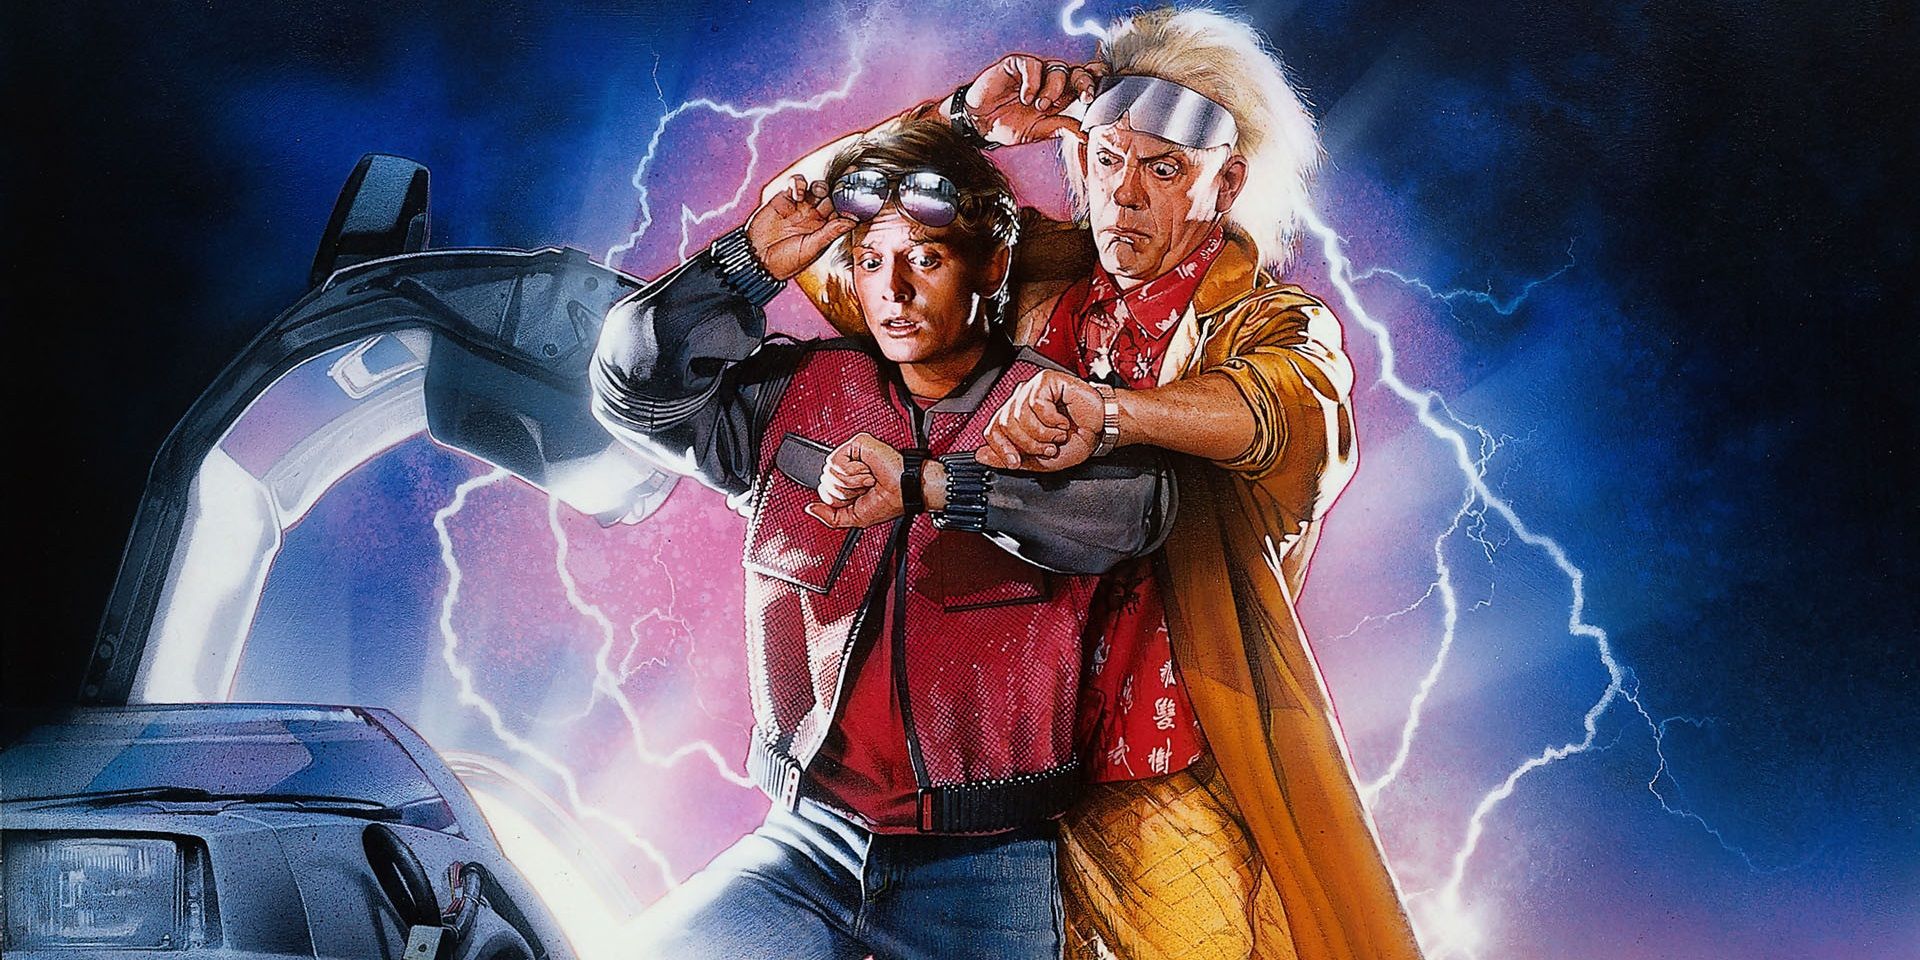 Doc and Marty on the poster for Back to the Future Part II